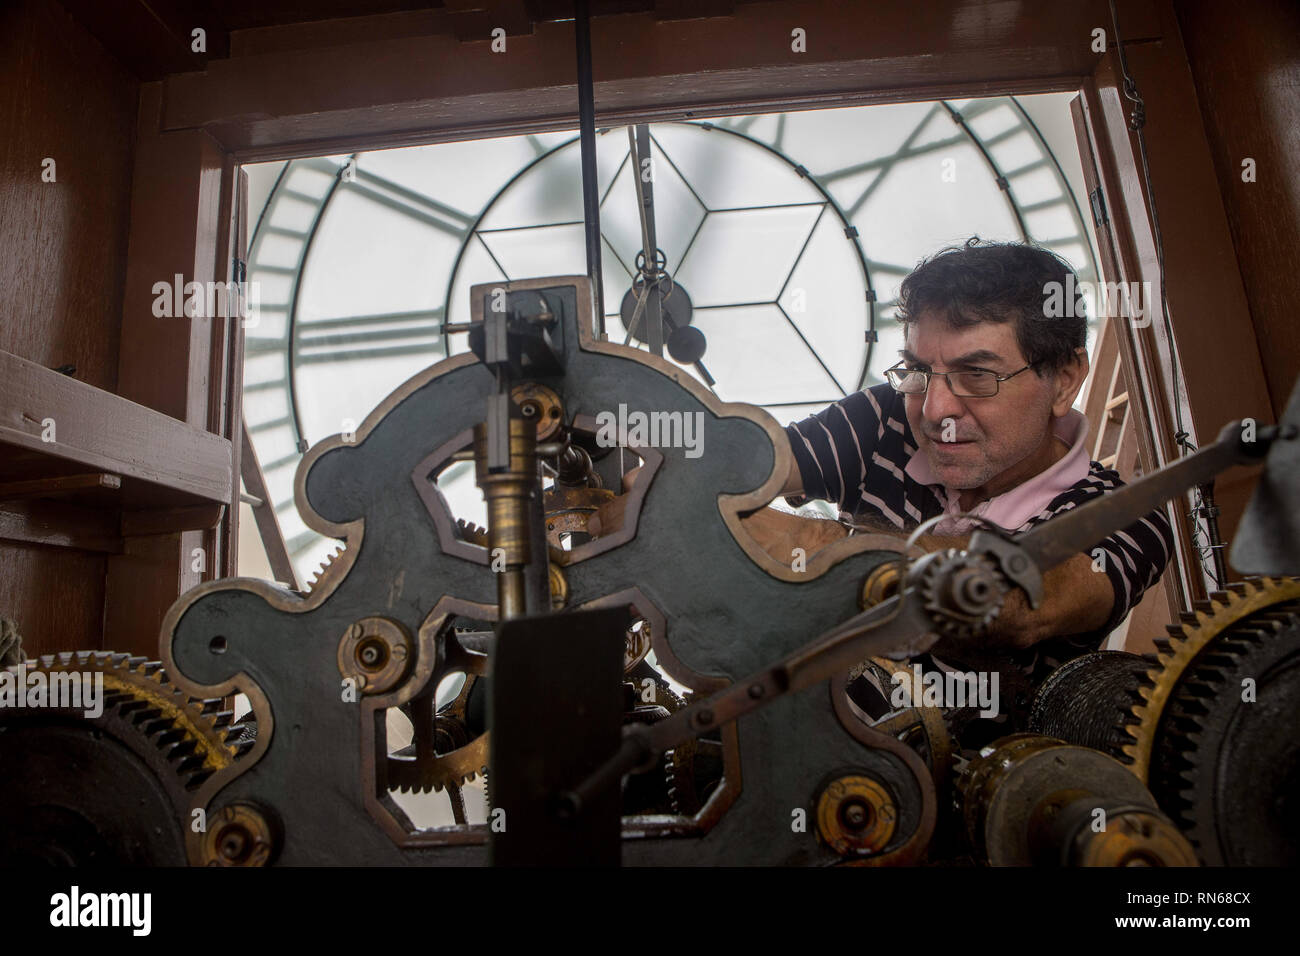 Sao Paulo, Brazil. 17th Feb, 2019. Watchmaker AUGUSTO FIORELLI adjusts the clock of the Portuguese Language Museum, in the tower of Sao Paulo's light train station, at the end of Daylight Savings Time in Brazil. Credit: Dario Oliveira/ZUMA Wire/Alamy Live News Stock Photo